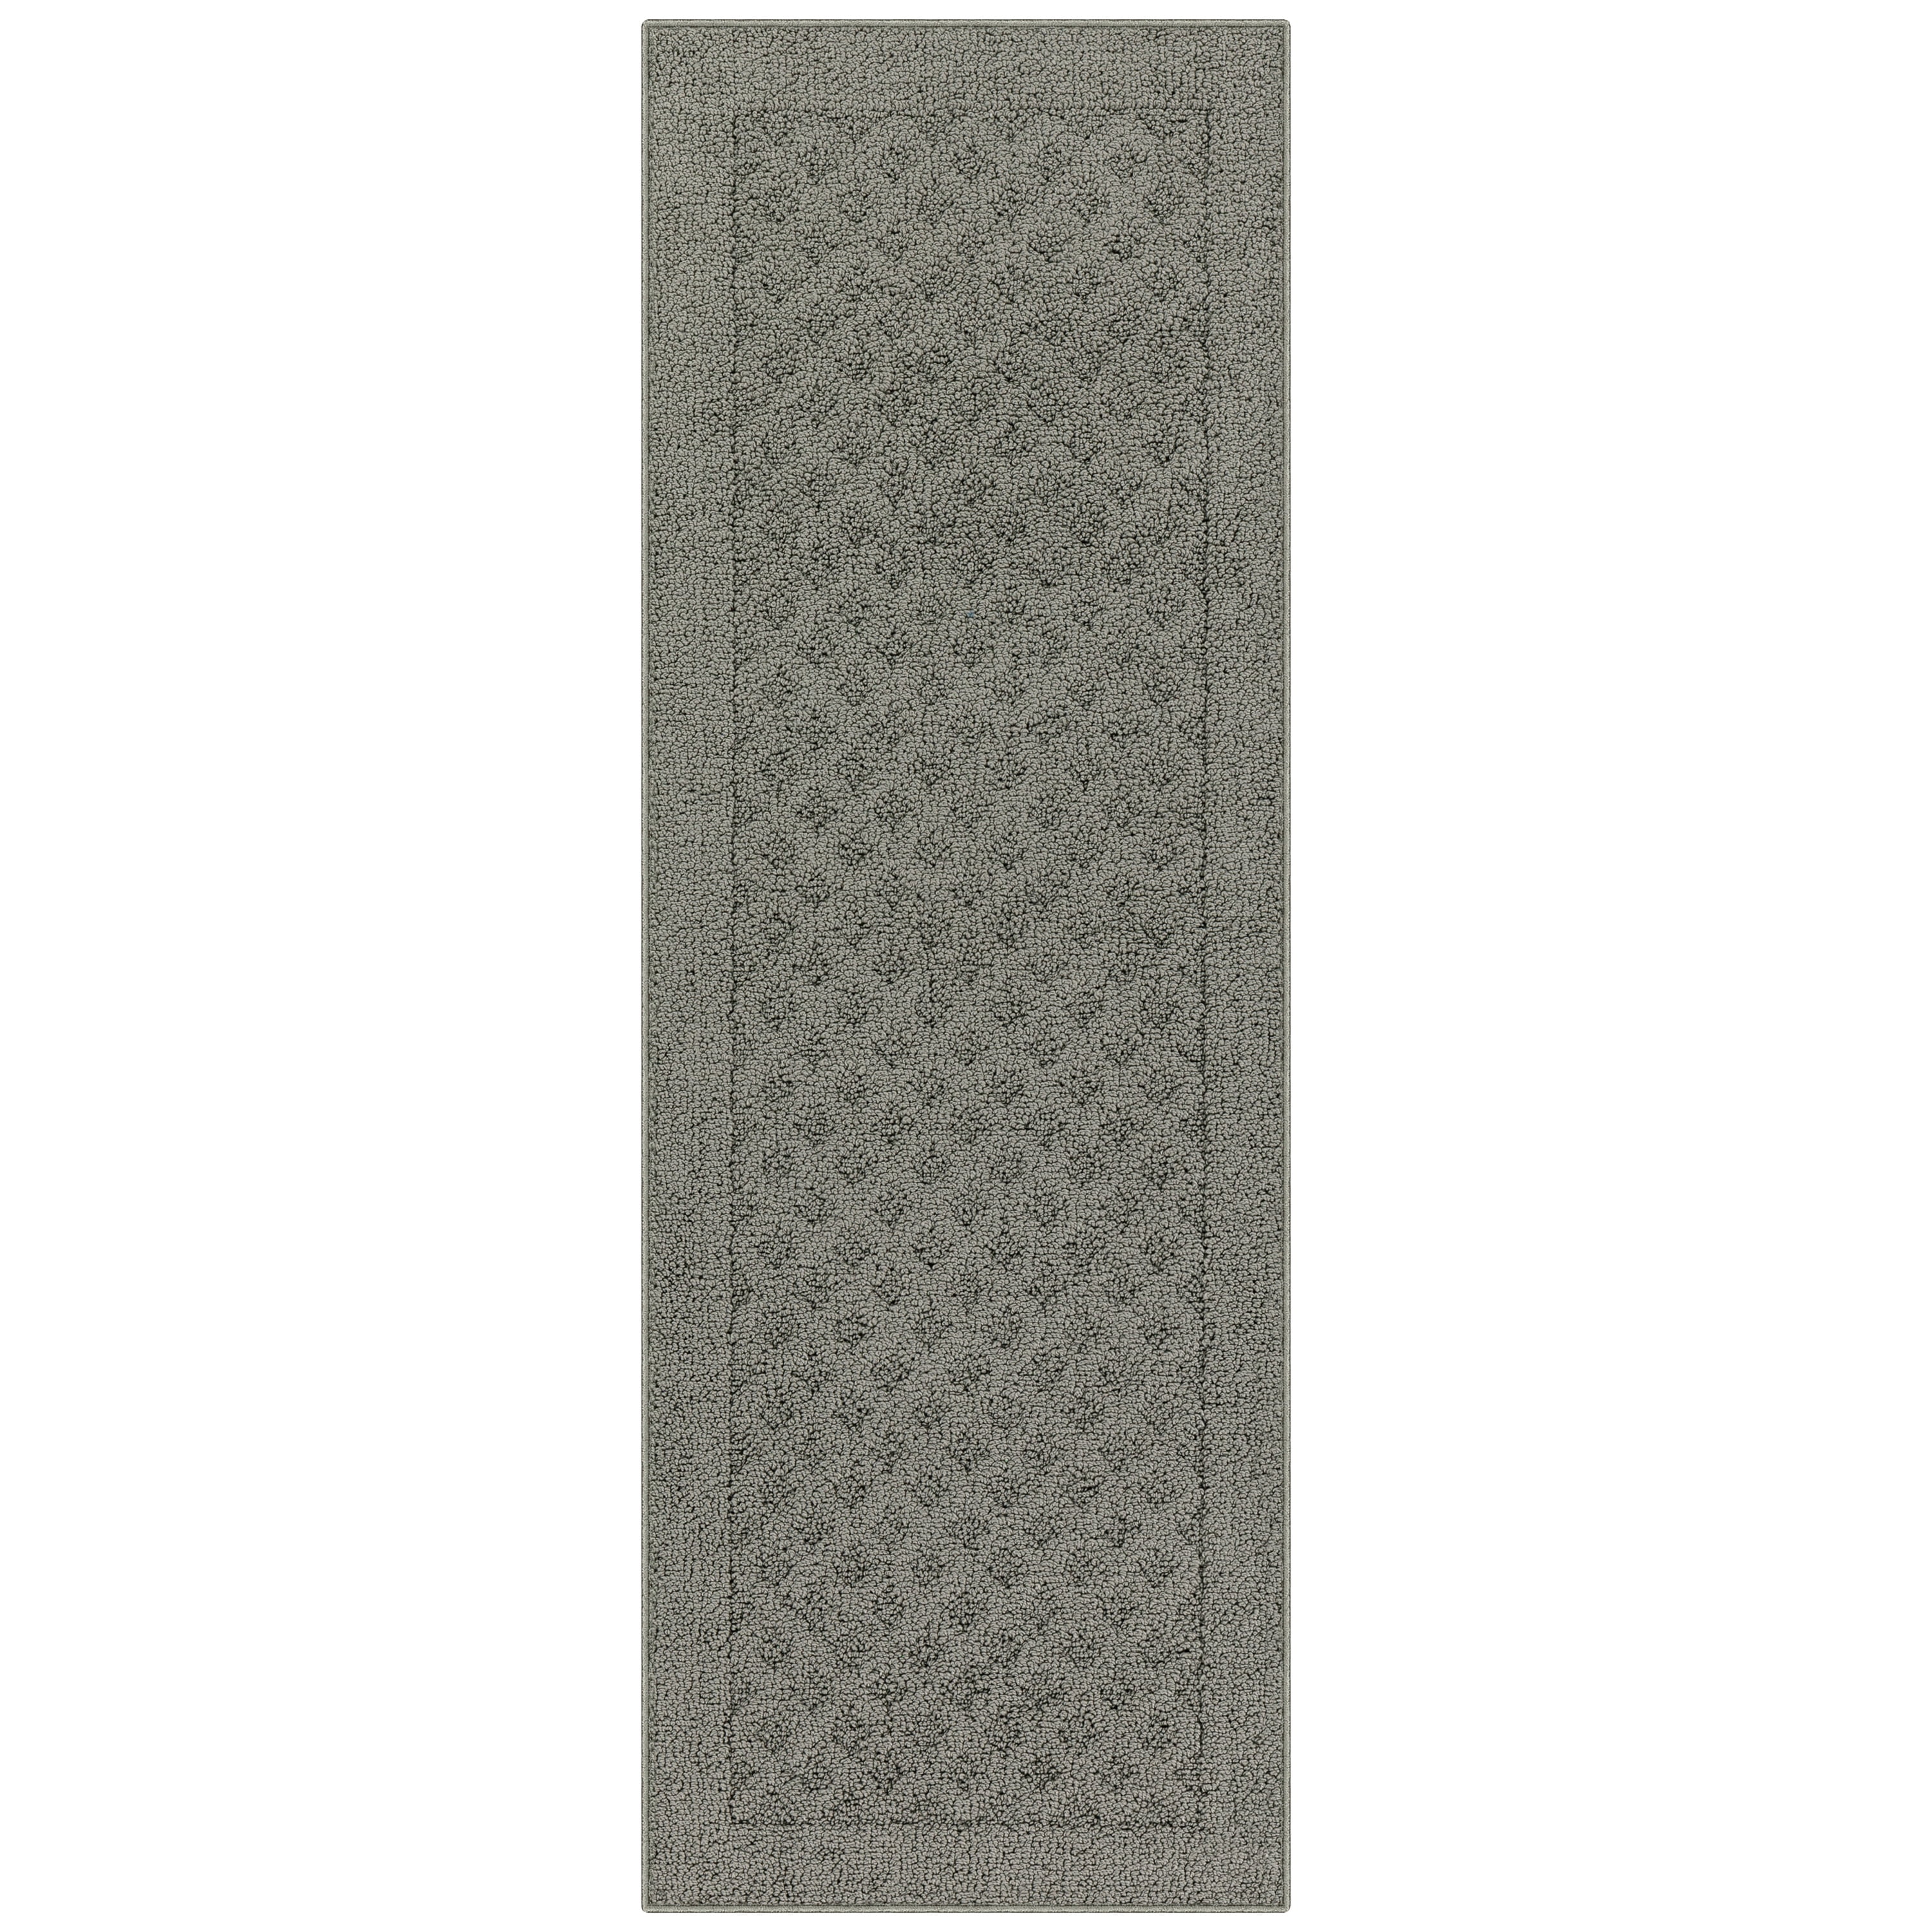 Mainstays Dylan Solid Diamond Traditional Runner Pewter Rug, 1'9"x5'